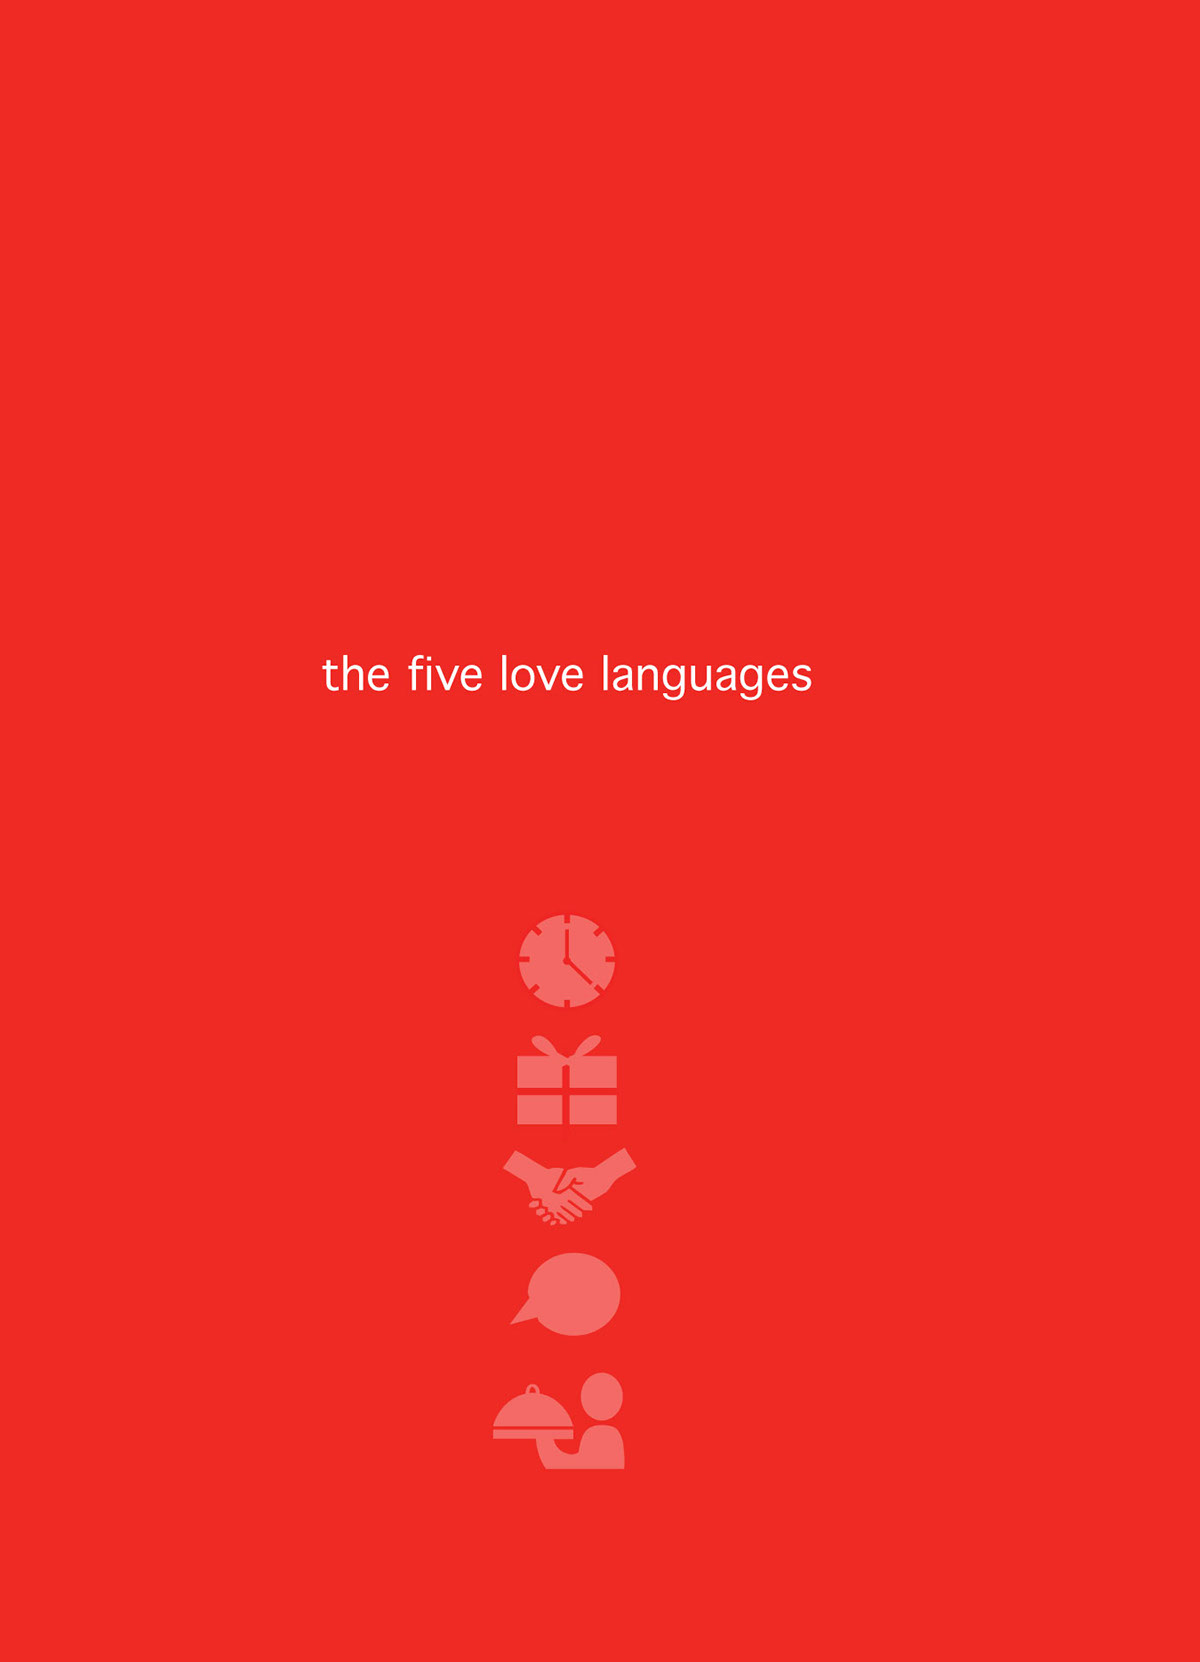 book  cover  design five  love  Languages  gary  chapman